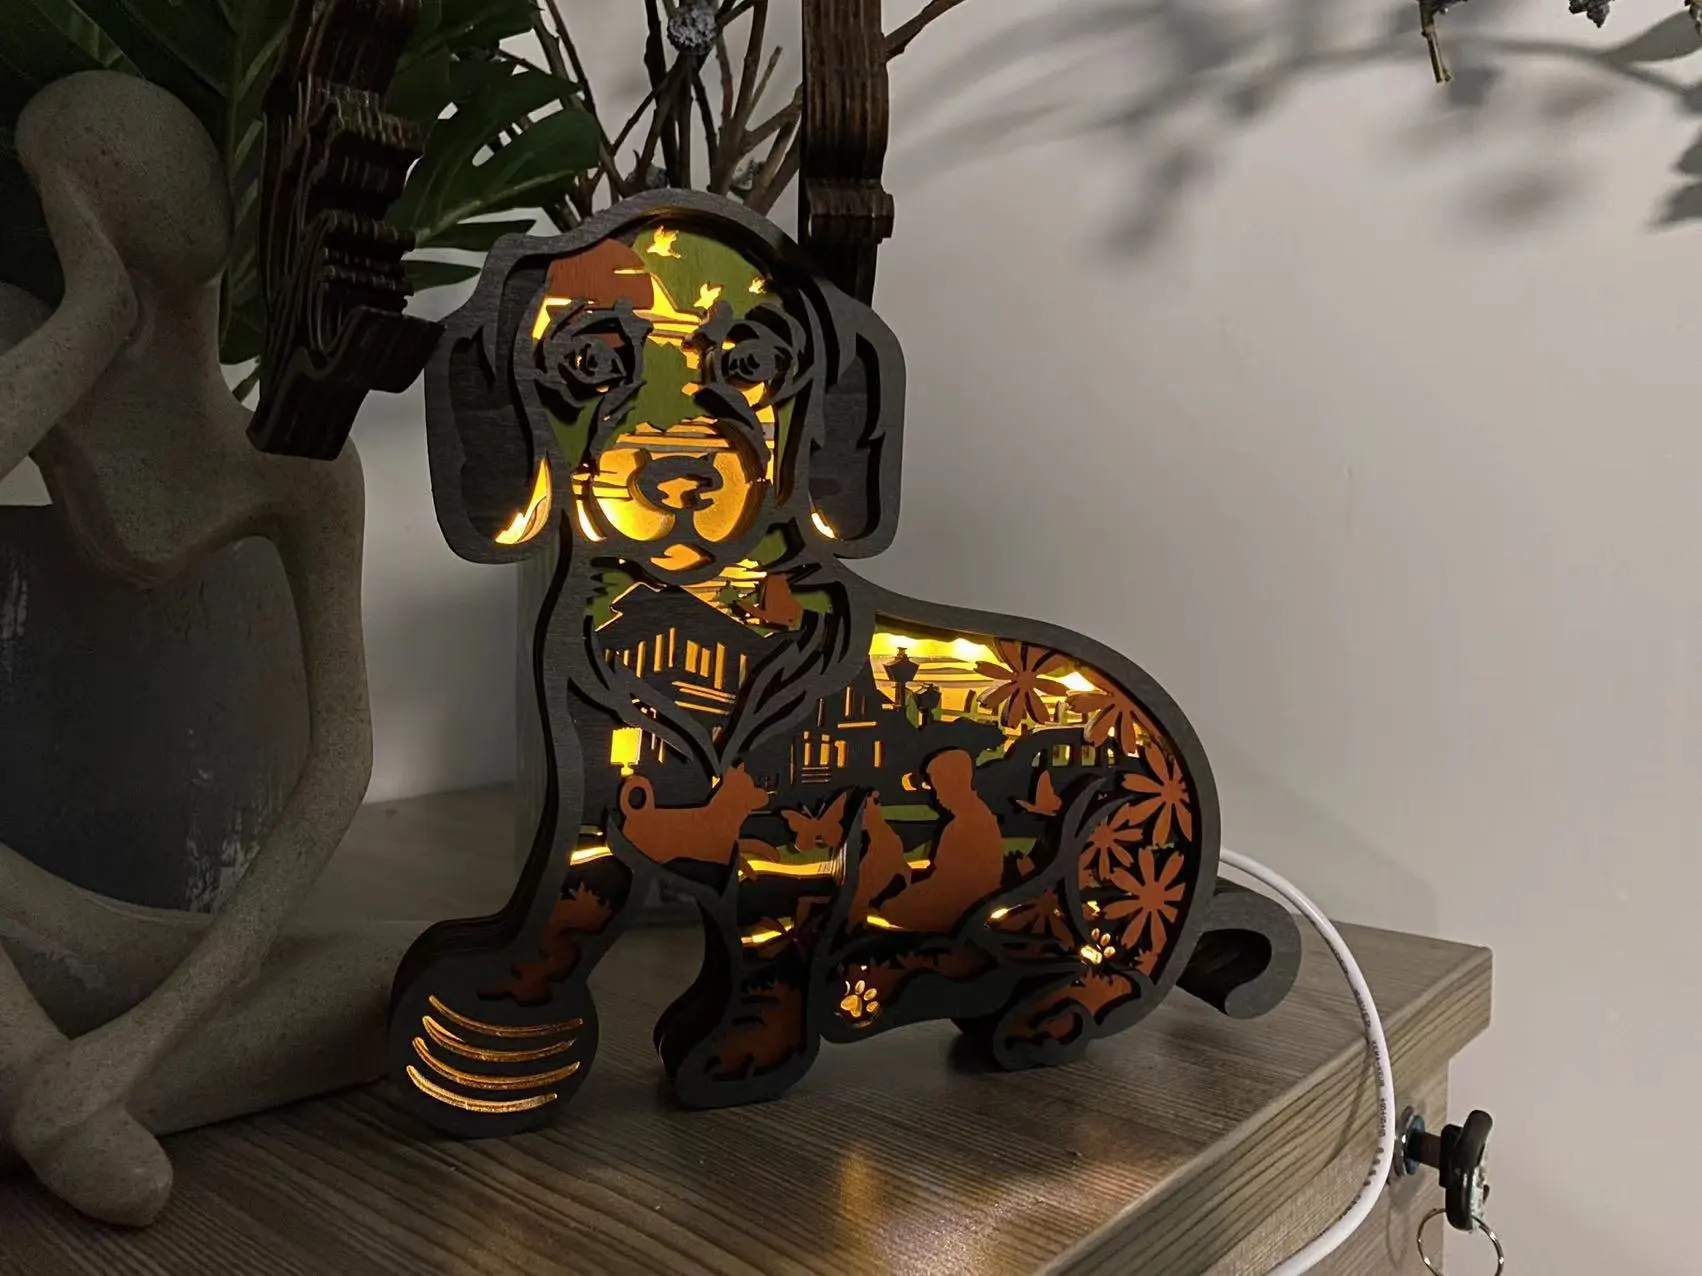 17.7 Inch Dachshund 3D Wood Animal Statue Lamp with Voice Control and Remote Control